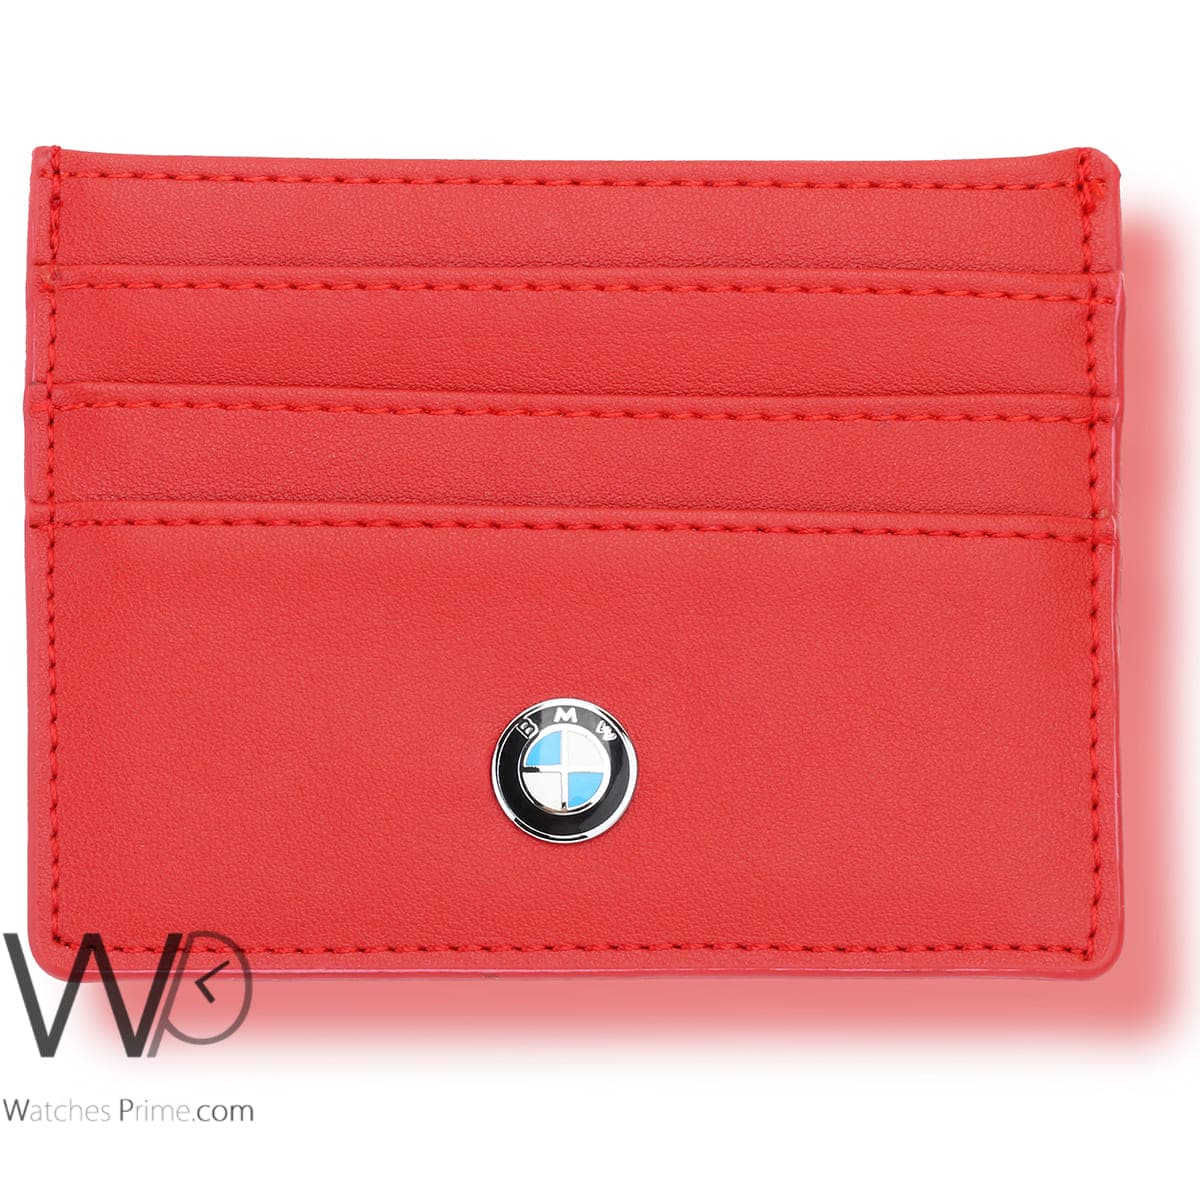 bmw-card-holder-red-leather